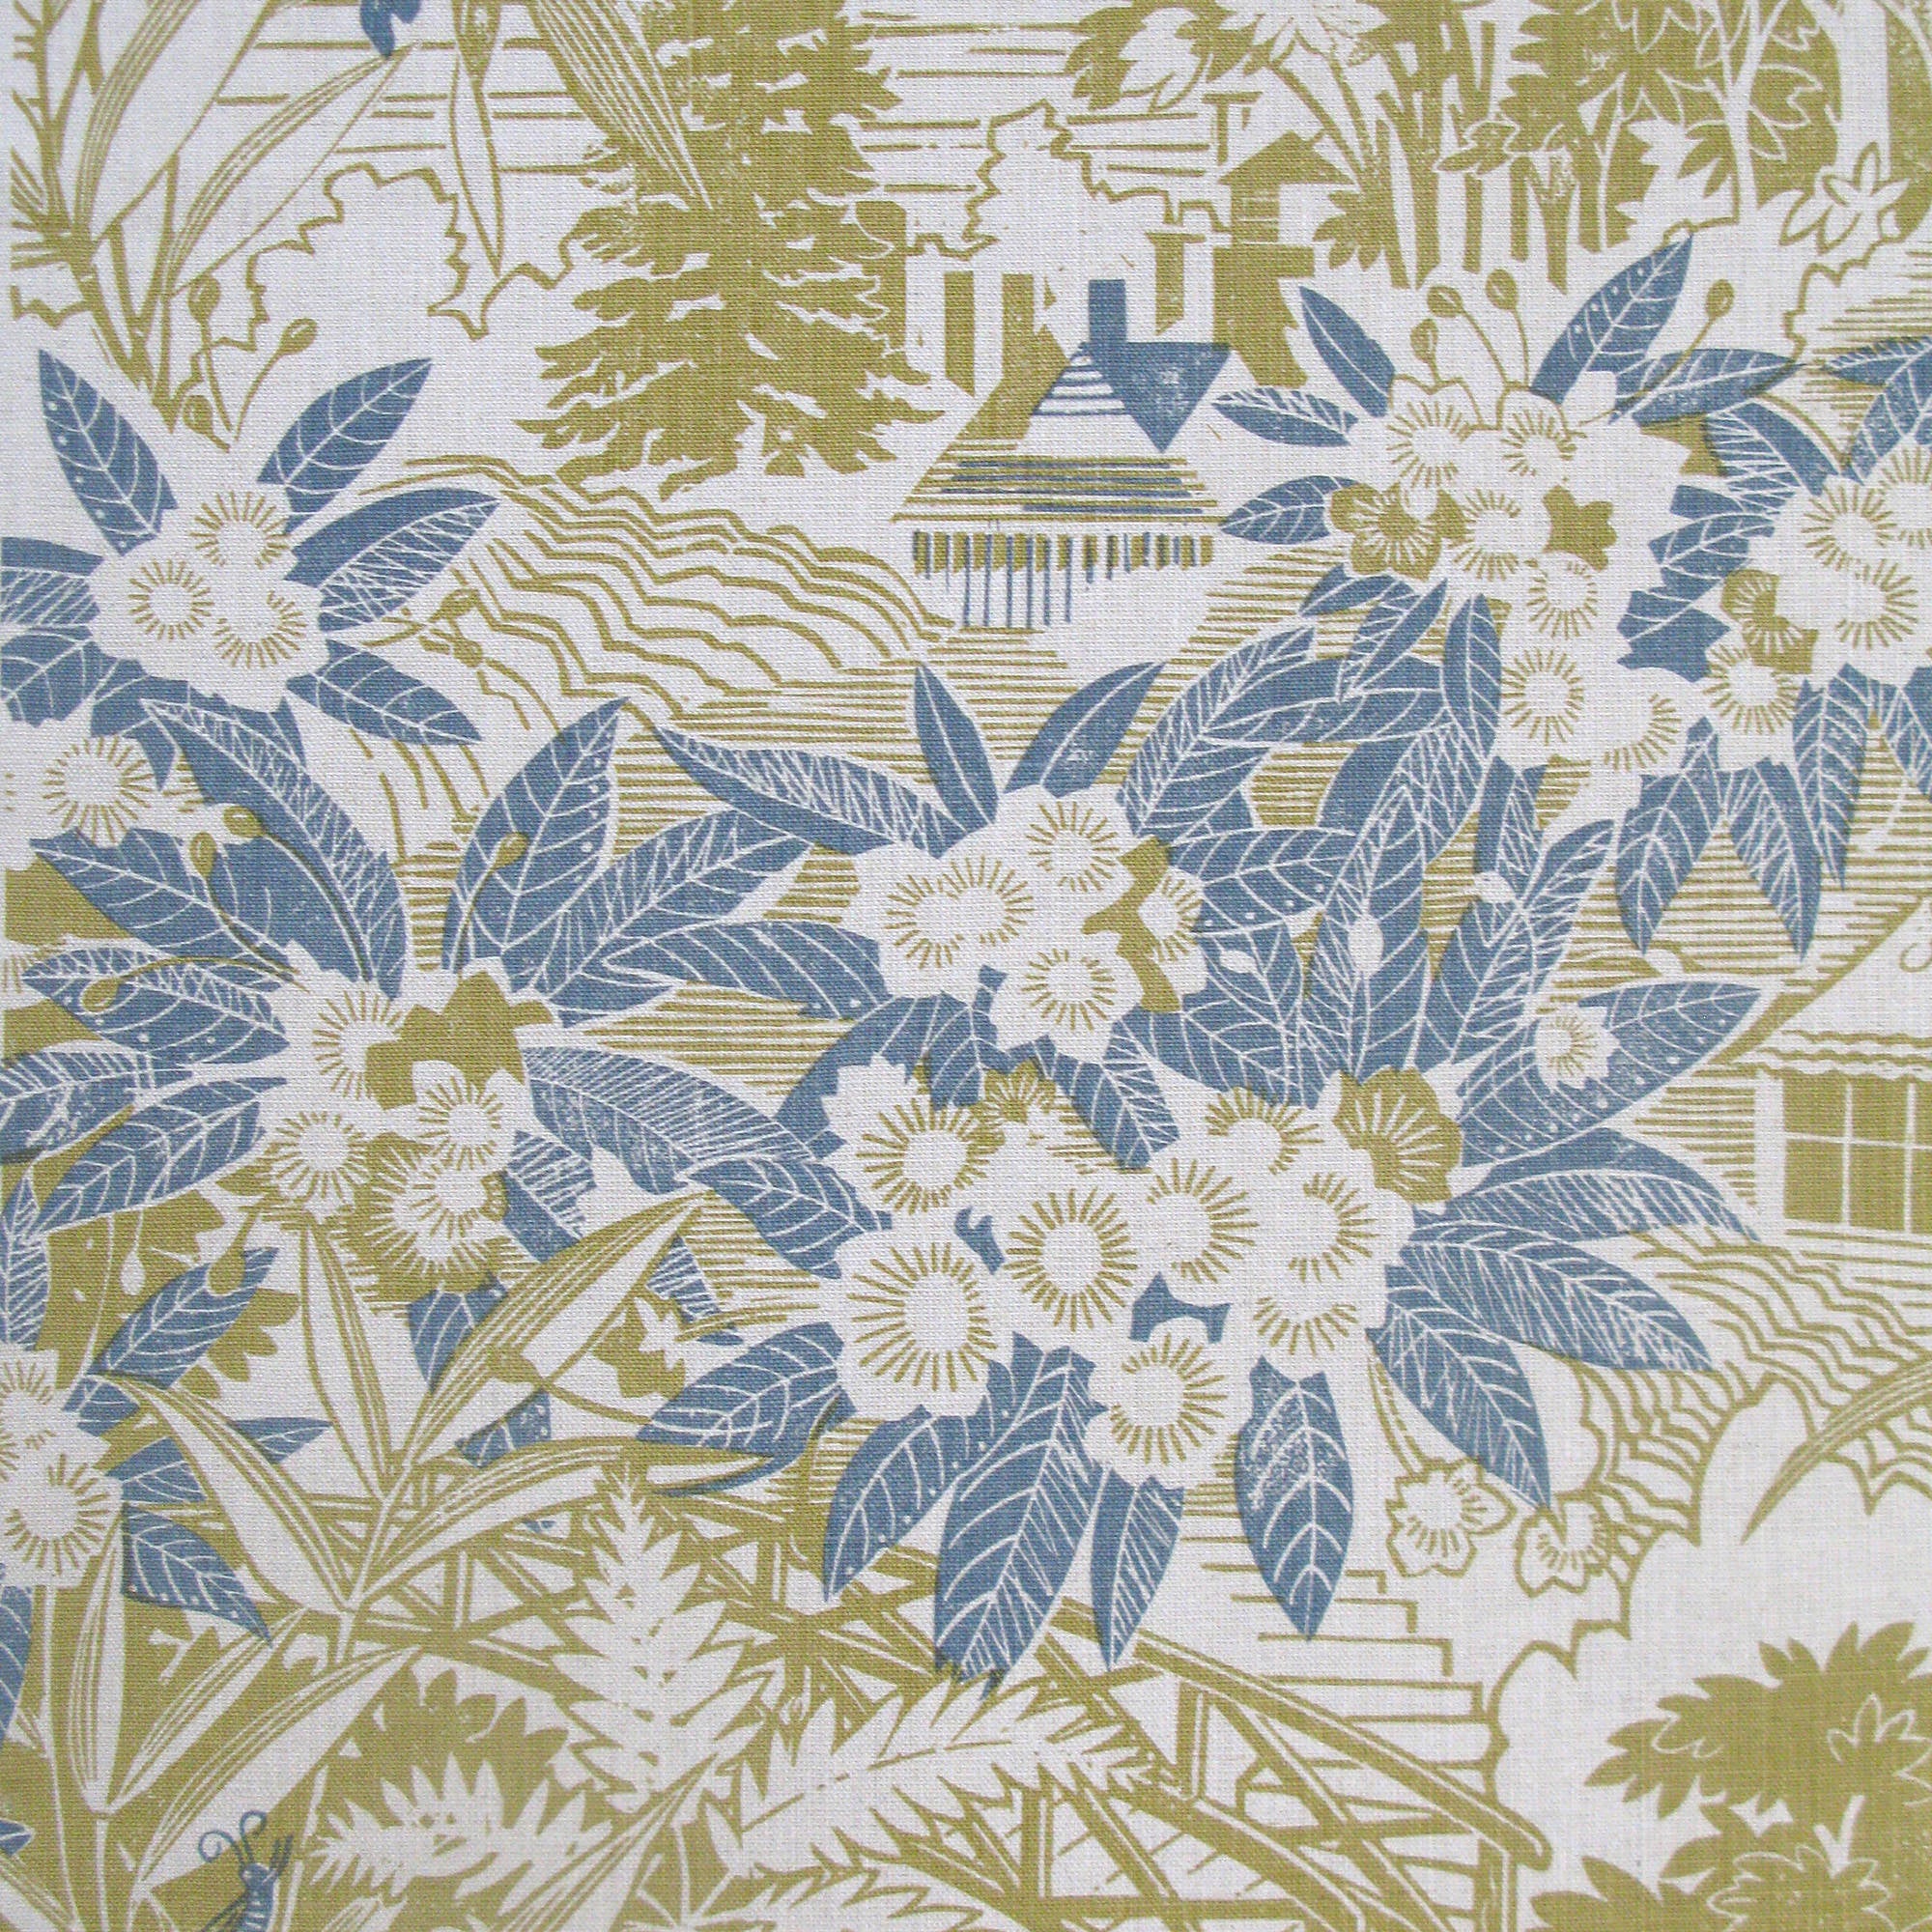 Detail of fabric in an intricate botanical, bridge and house print in blue and green on a cream field.